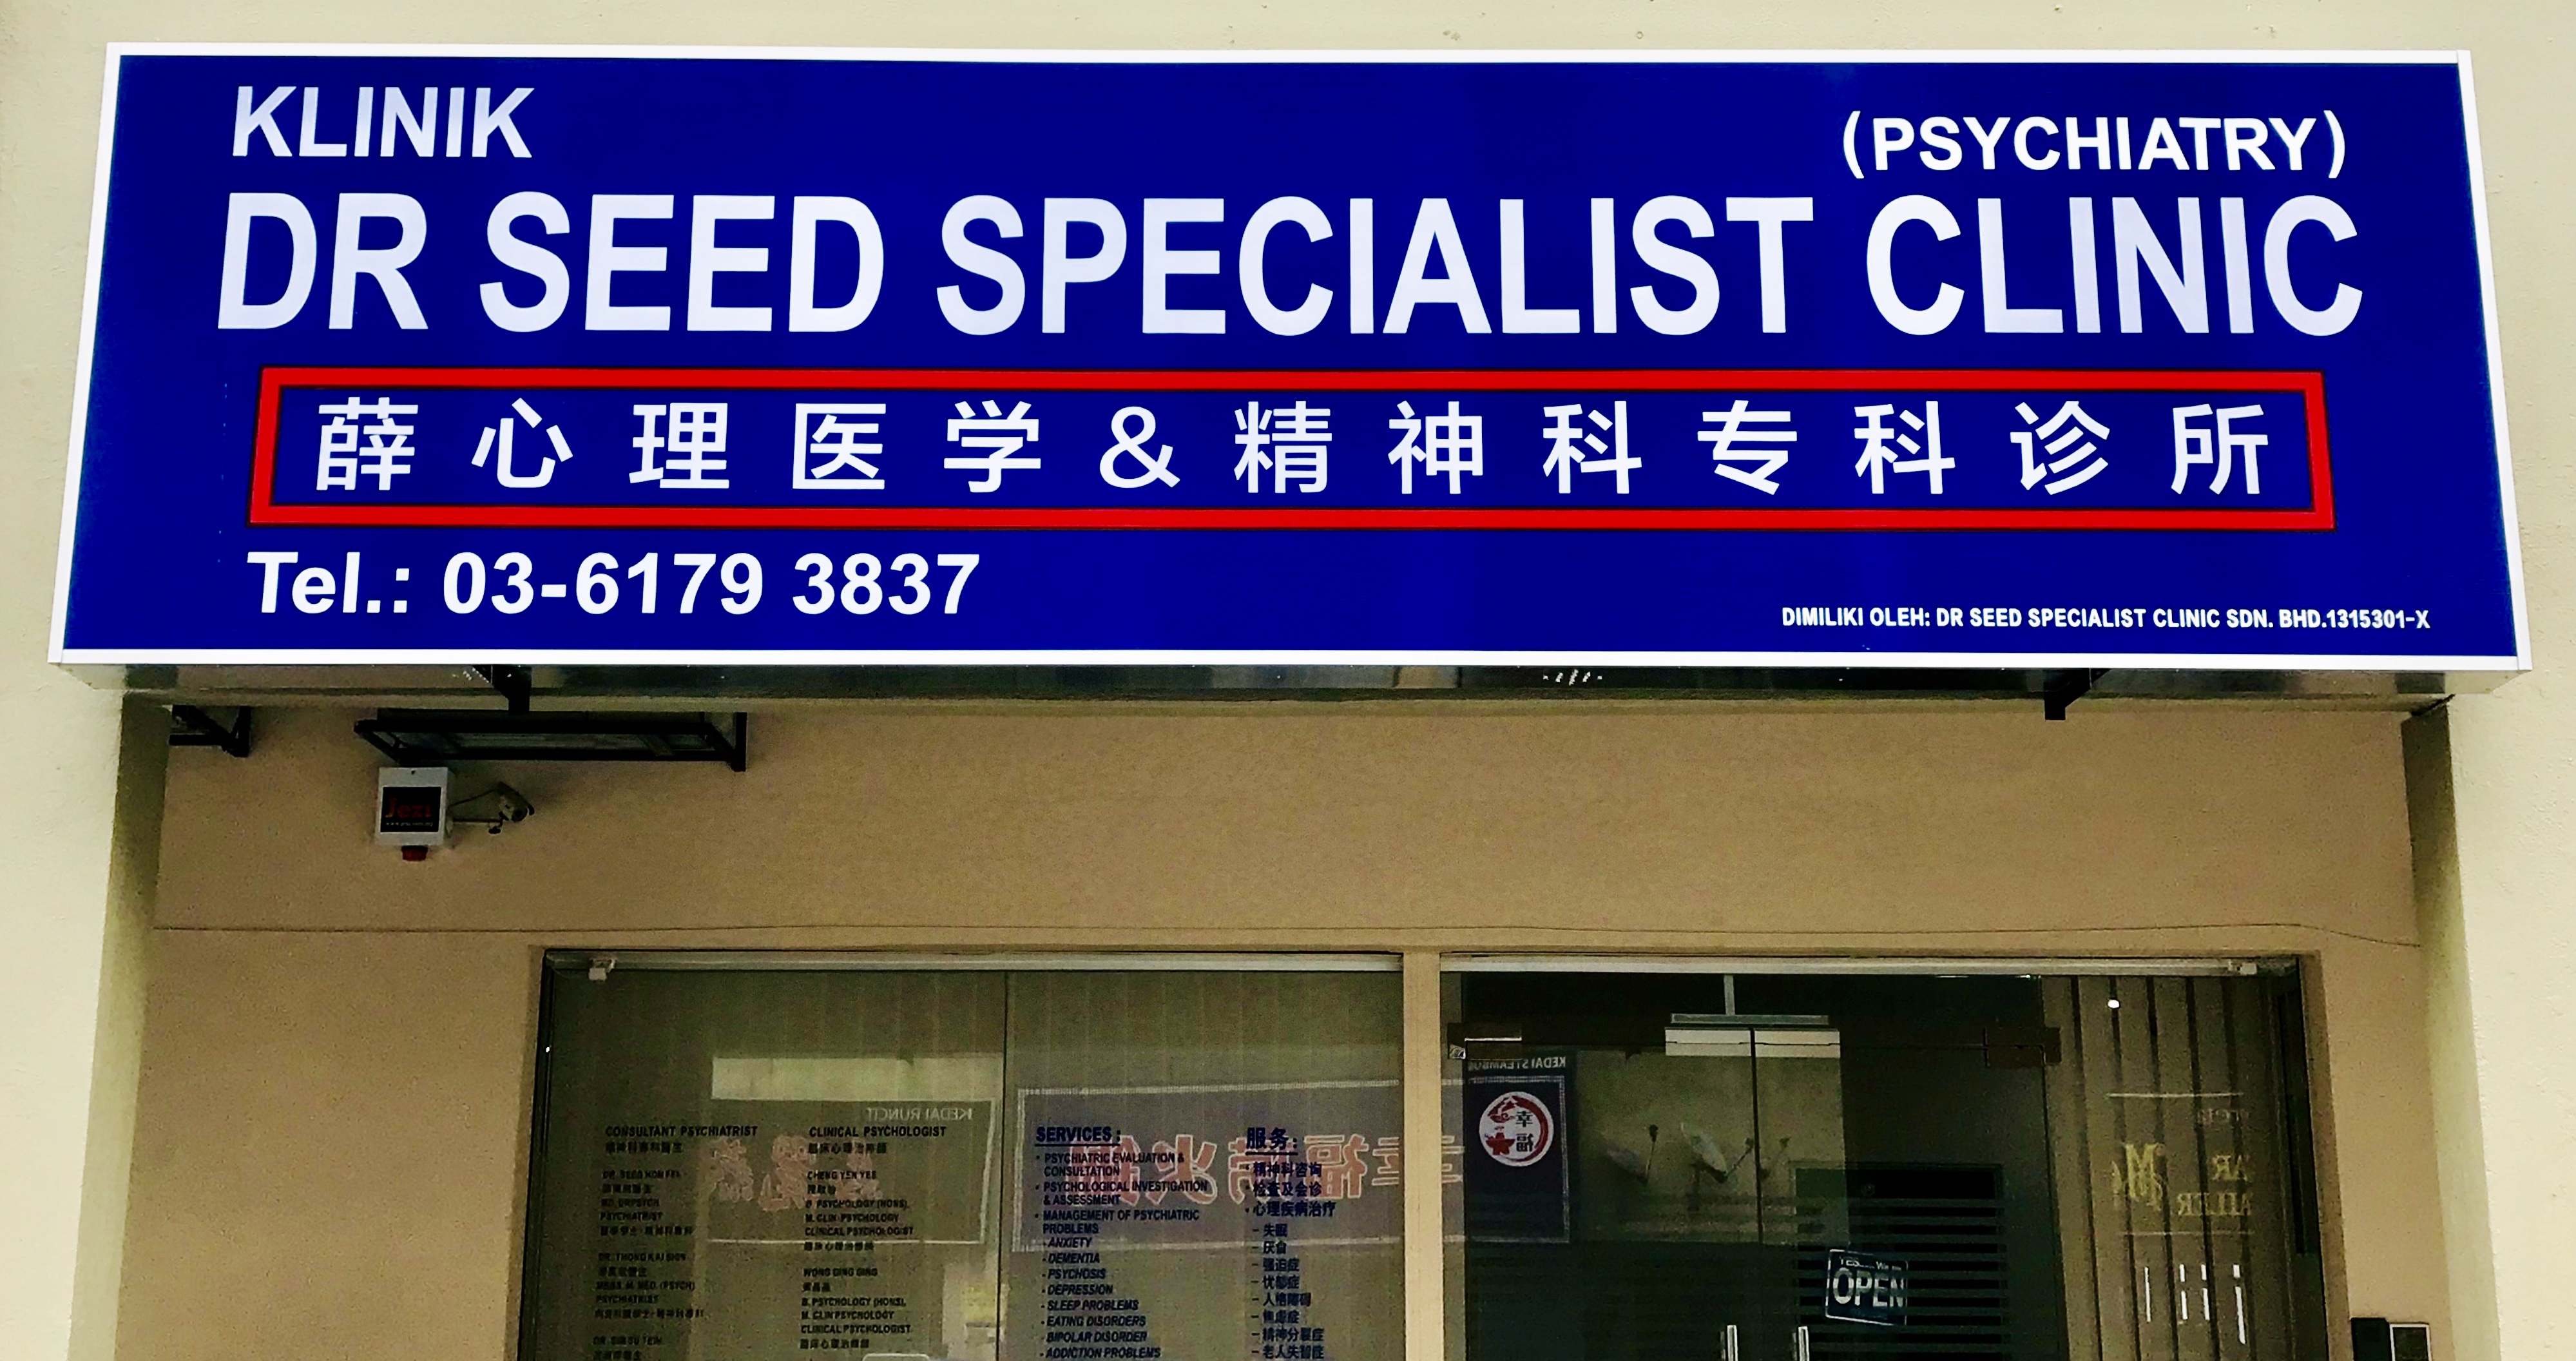 Are You Looking for Help? 你在寻求帮助吗？